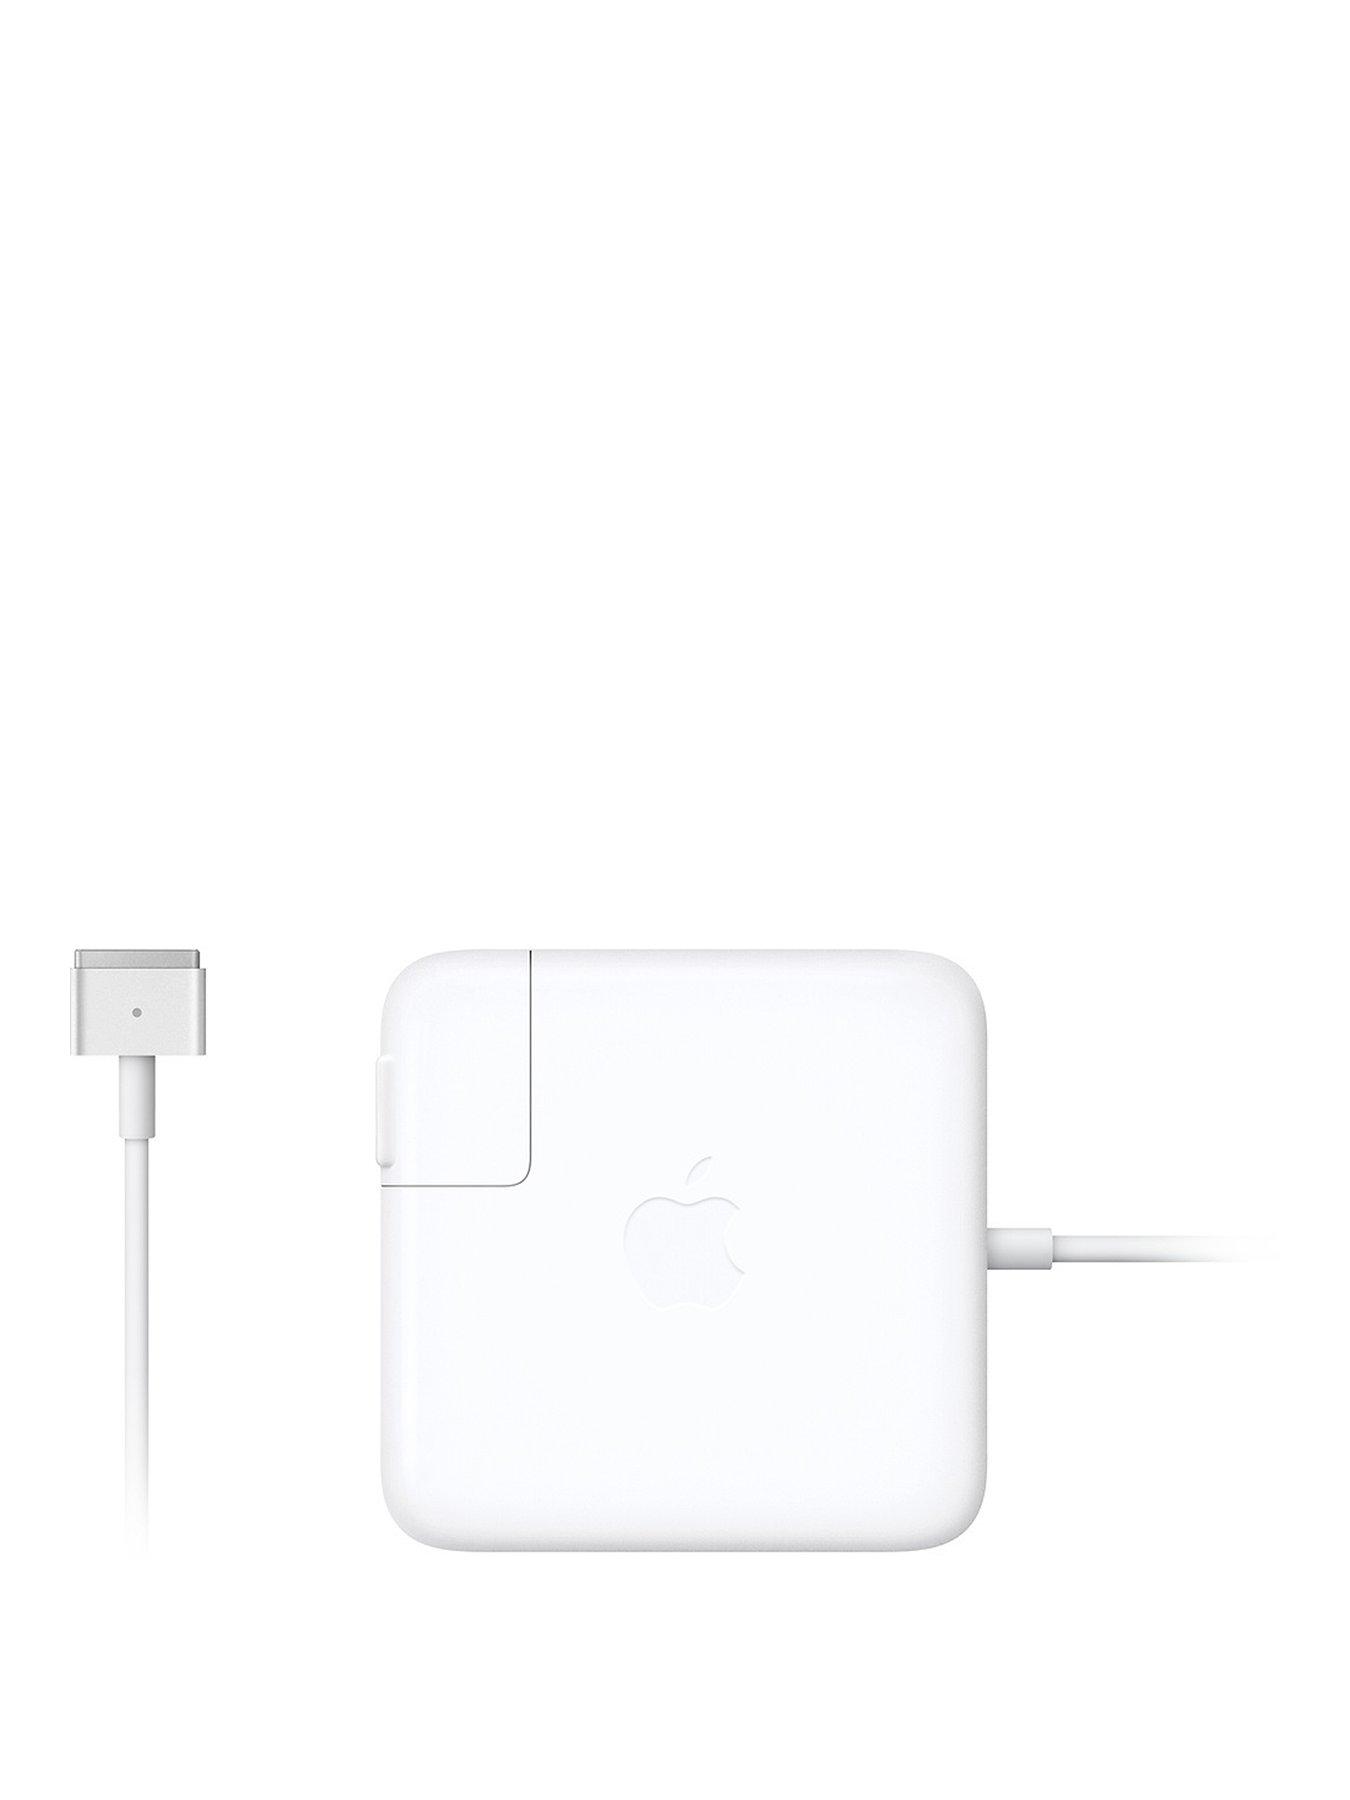 UK NEW APPLE 60W MAGSAFE 2 POWER ADAPTER CHARGER FOR MACBOOK PRO 13 INCH NEW